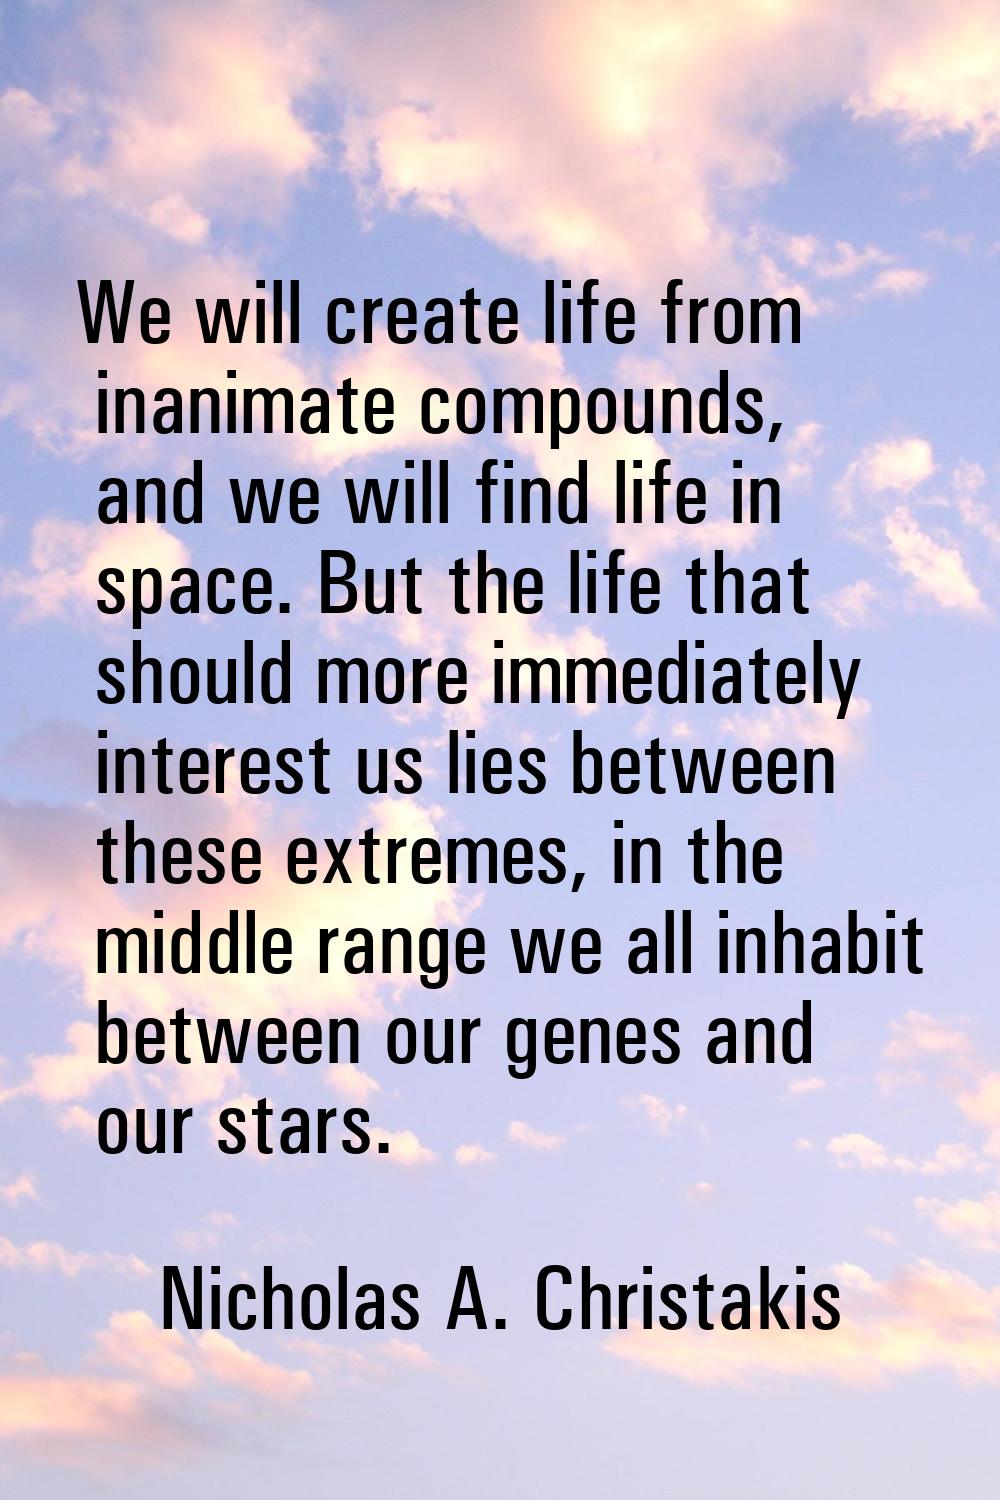 We will create life from inanimate compounds, and we will find life in space. But the life that sho